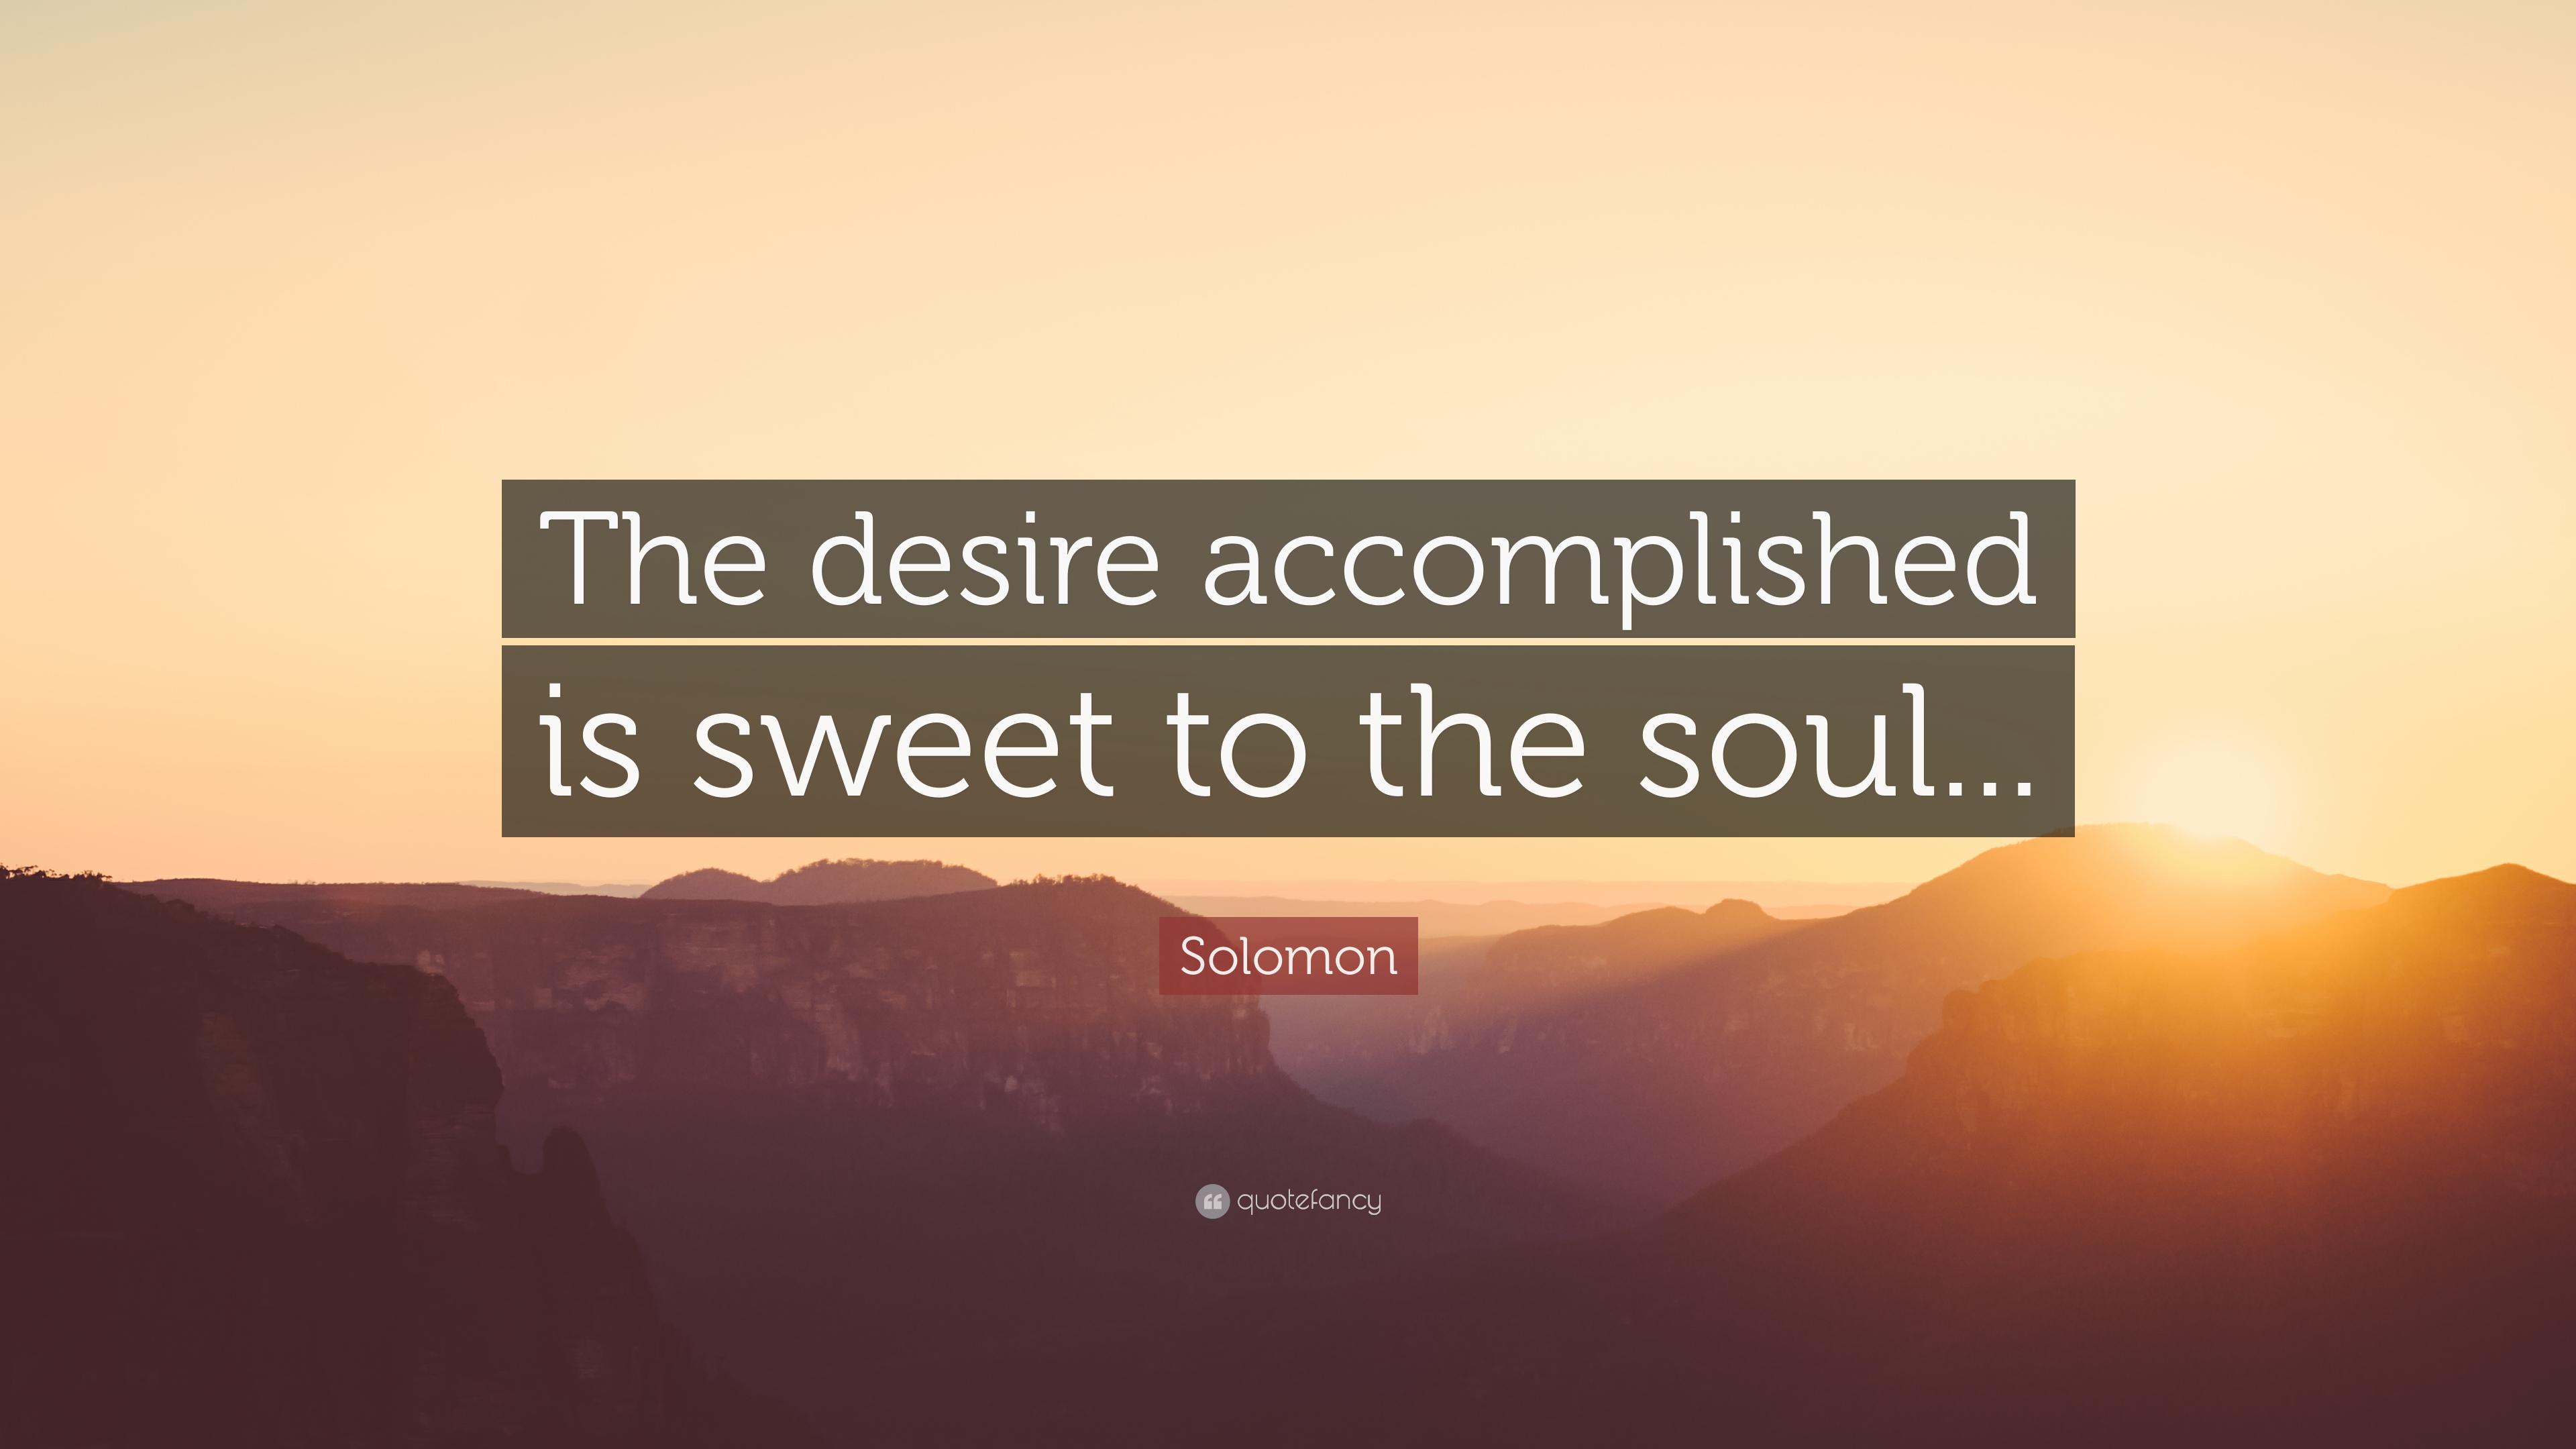 Solomon Quote: "The desire accomplished is sweet to the soul.